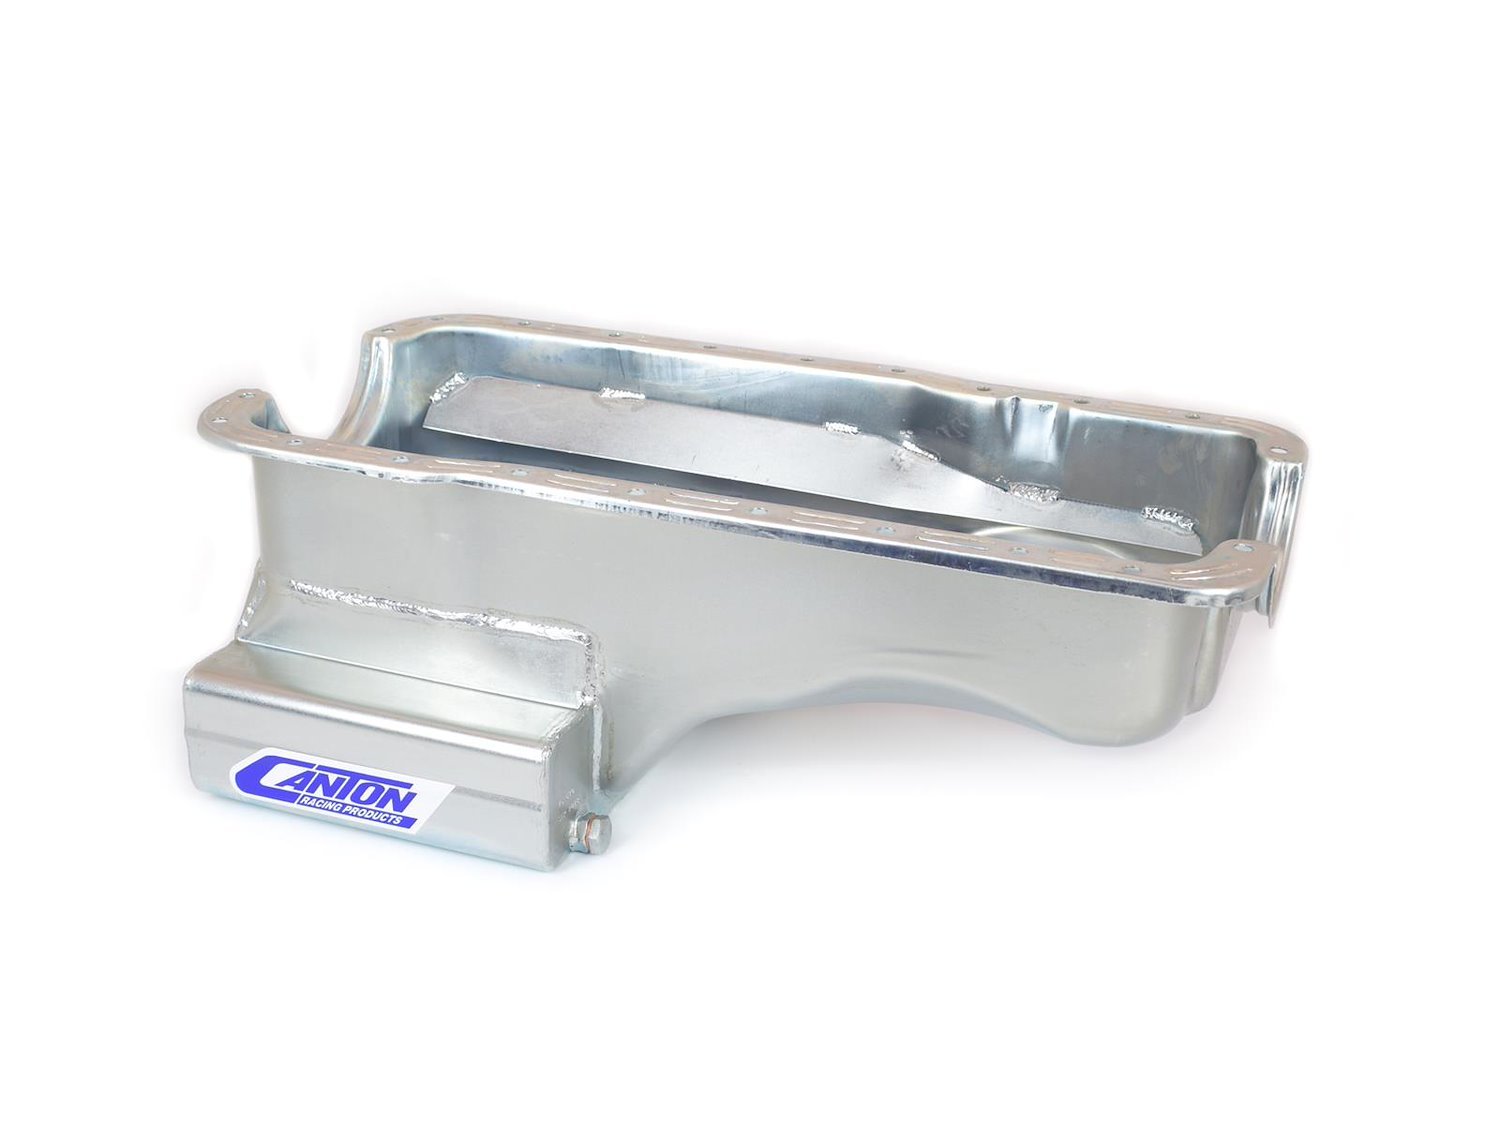 Canton Racing 20-907 Windage Tray Aluminum for S.M. Chevy Replacement